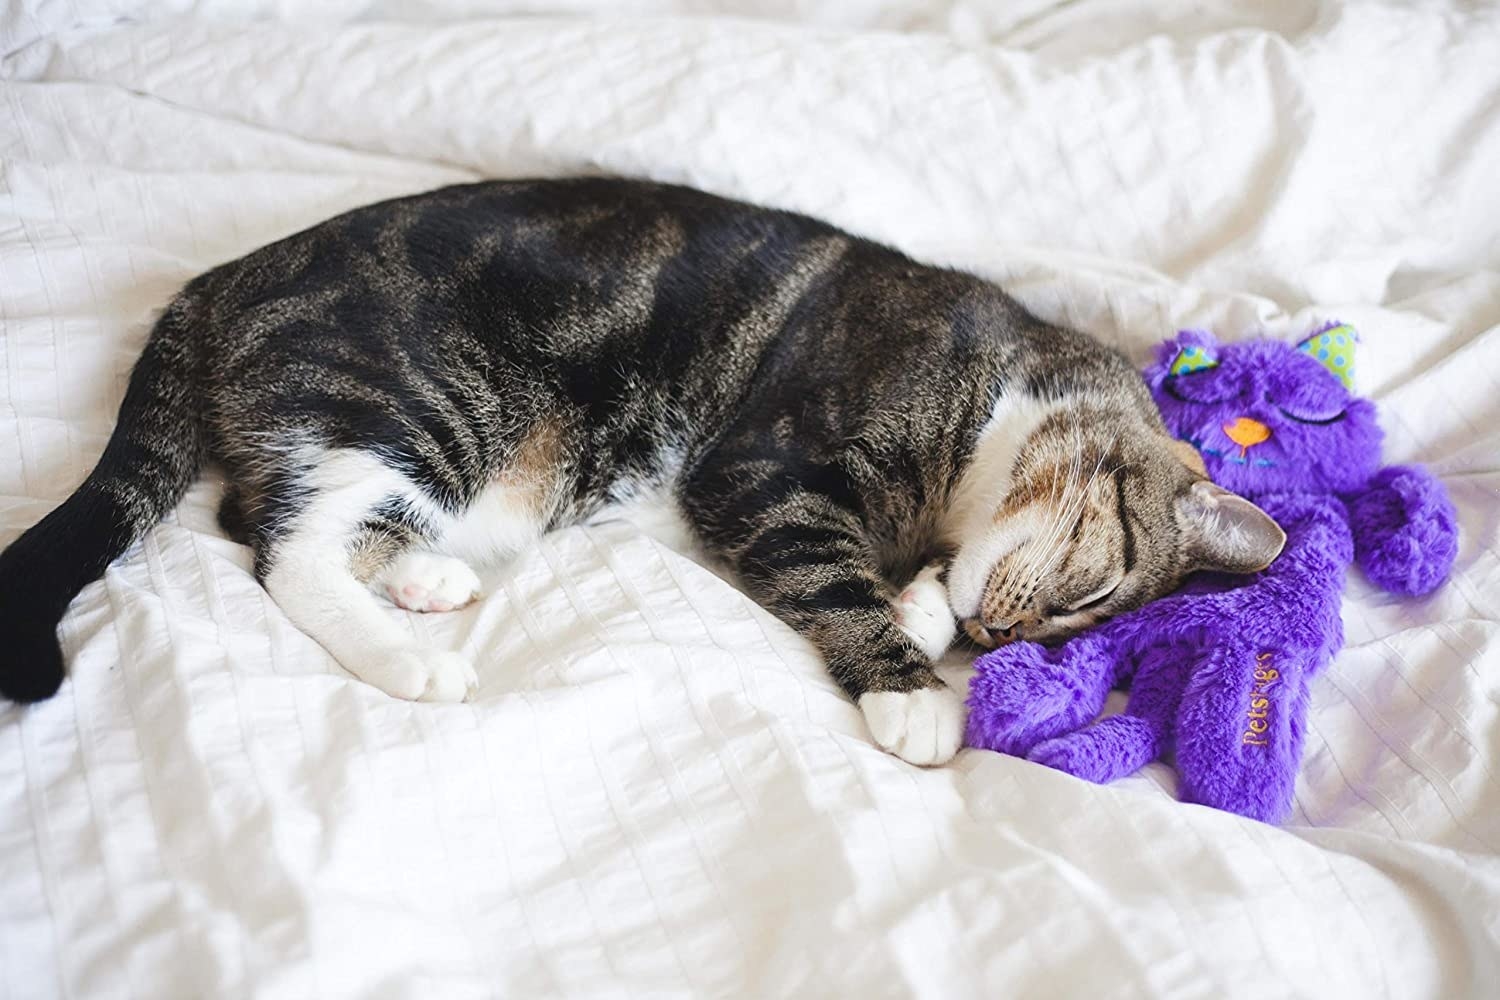 a cat snuggling with a purple cat-shaped stuffed toy